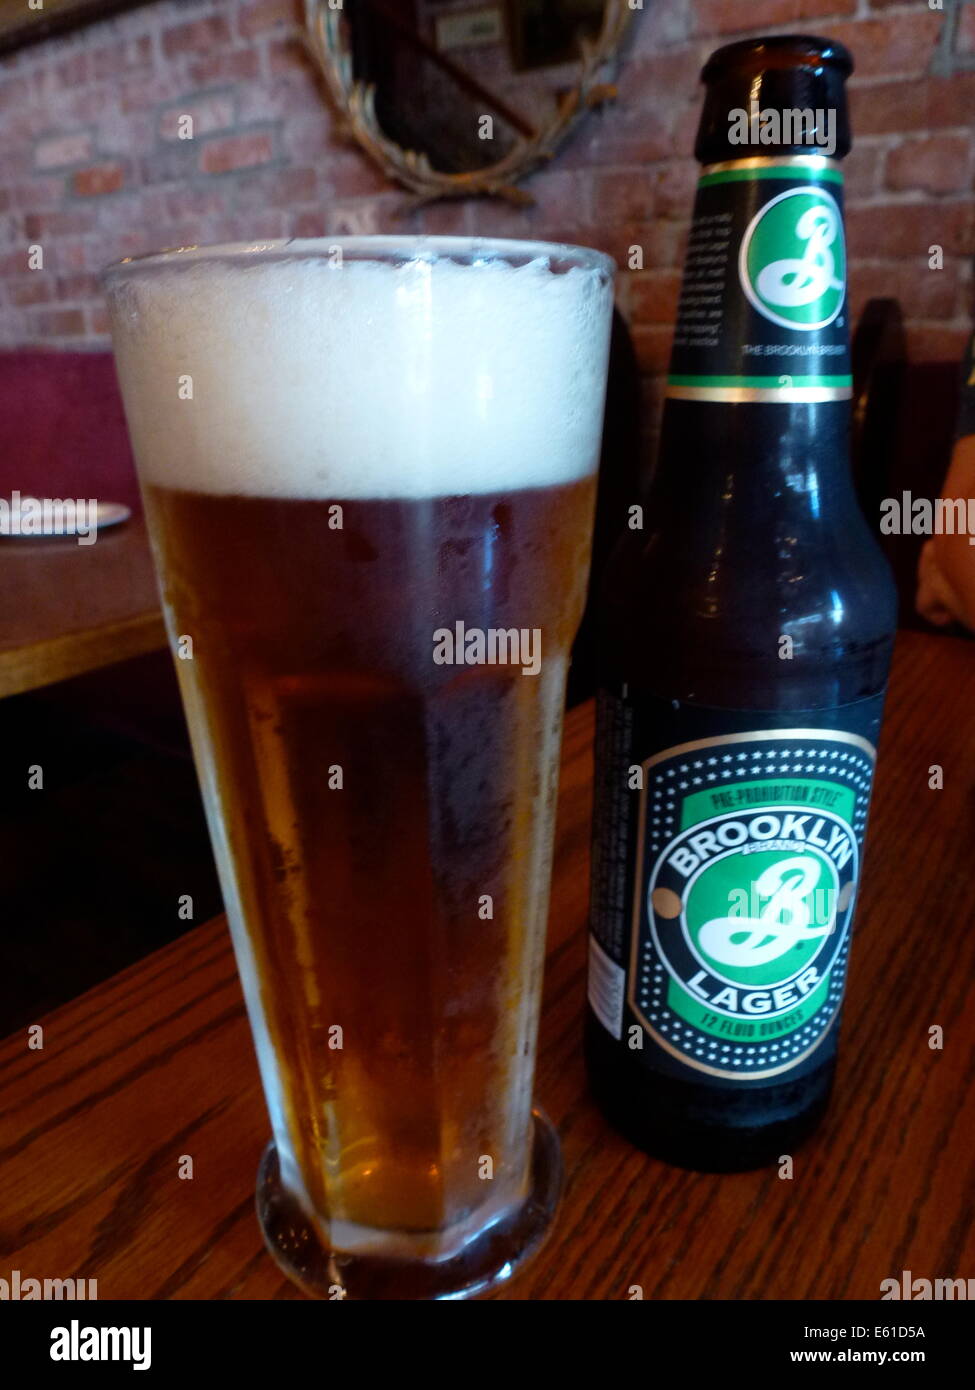 A beer glass and a beer bottle with Brooklyn Lager Beer of the Brooklyn Brewery in New York, USA, 24 June 2014. The logo of the brewery was designed by Milton Glaser, who also designed the 'I love NY' logo. Photo: Alexandra Schuler/dpa - ATTENTION! NO WIRE SERVICE - Stock Photo